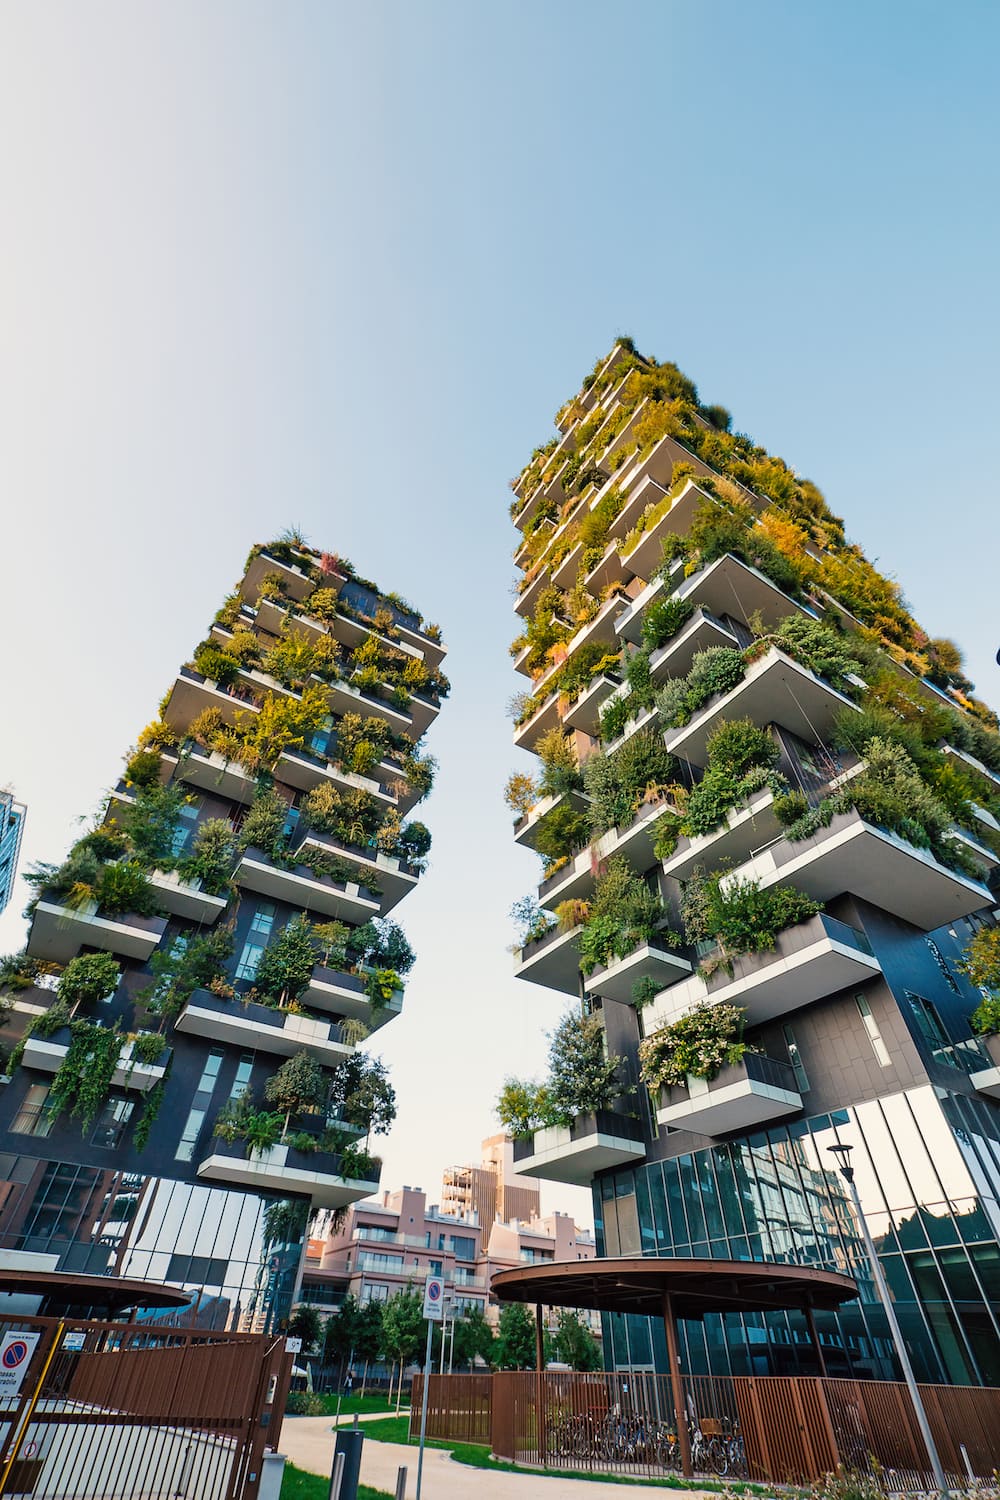 This is photo of the Bosco Verticale buildings in Milan